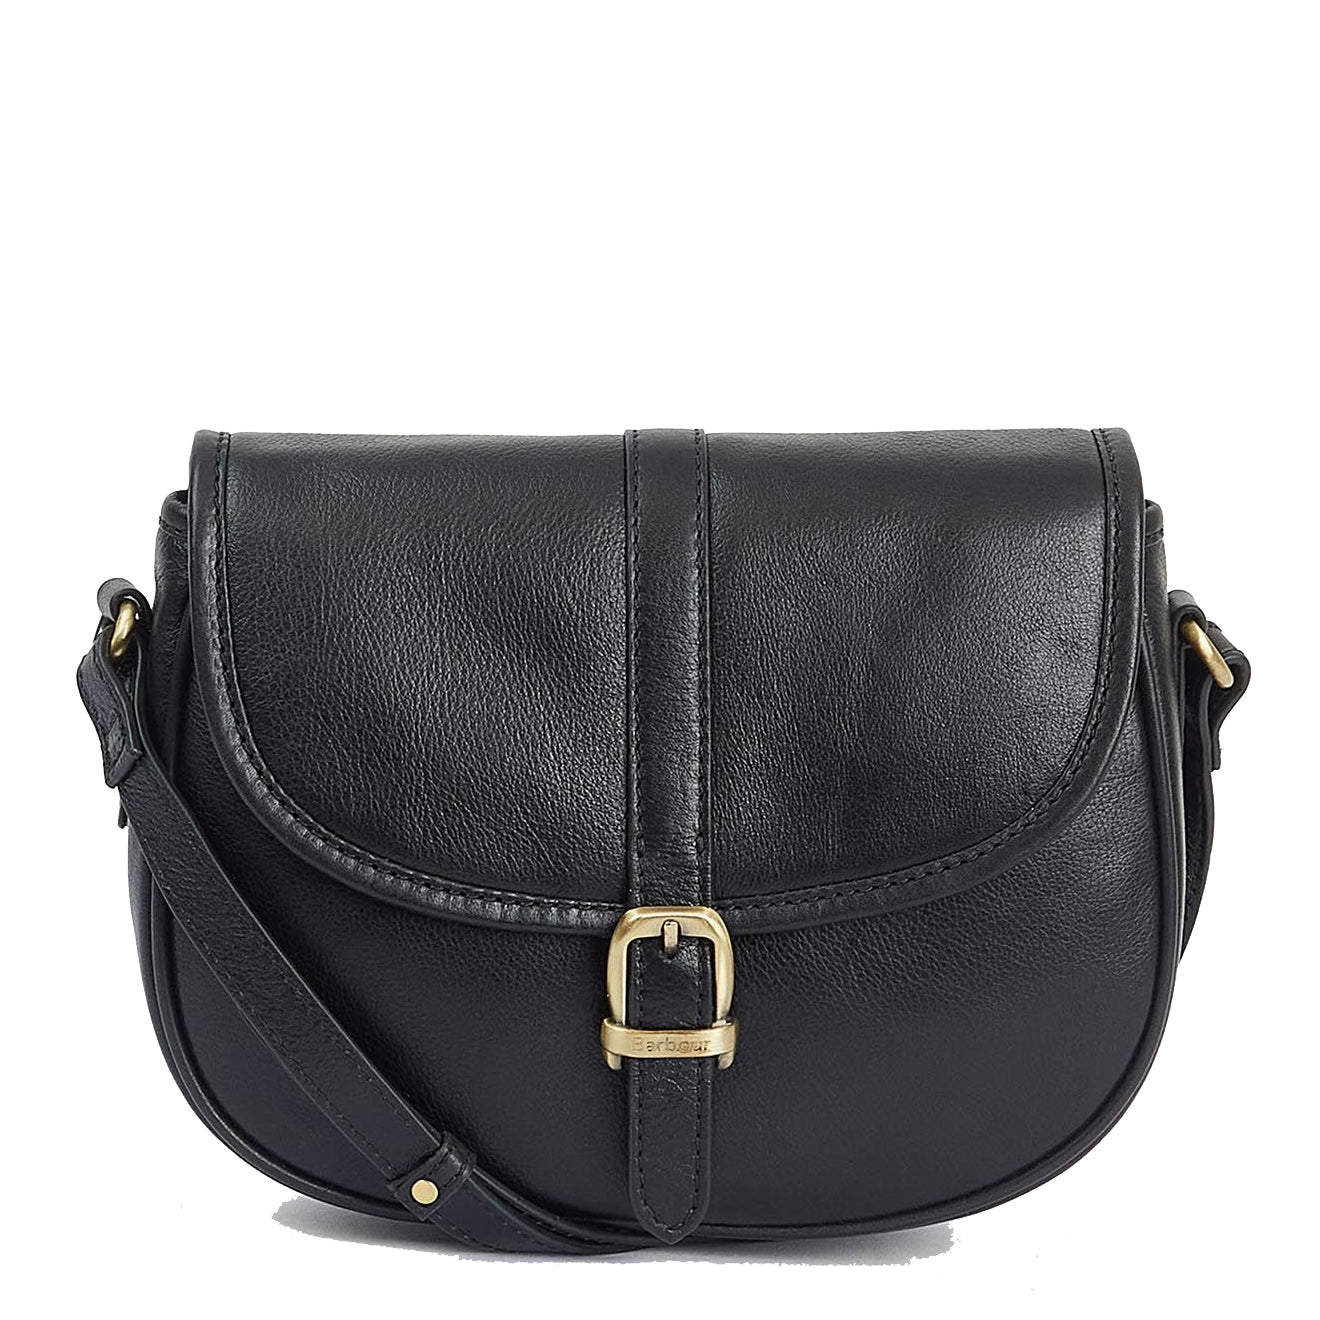 Barbour Laire Leather Saddle Bag Black | The Sporting Lodge